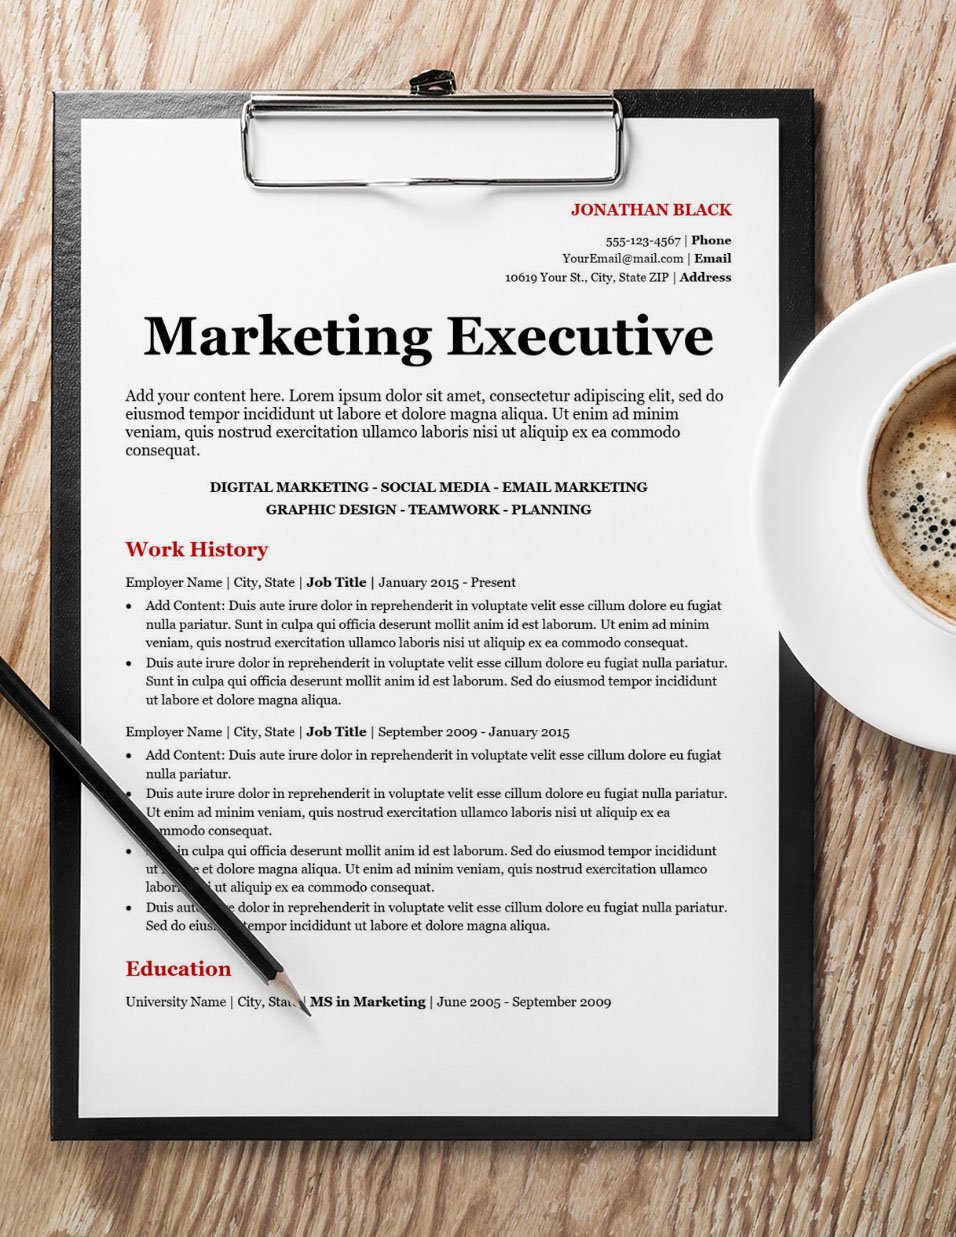 Oversized Resume with Coffee